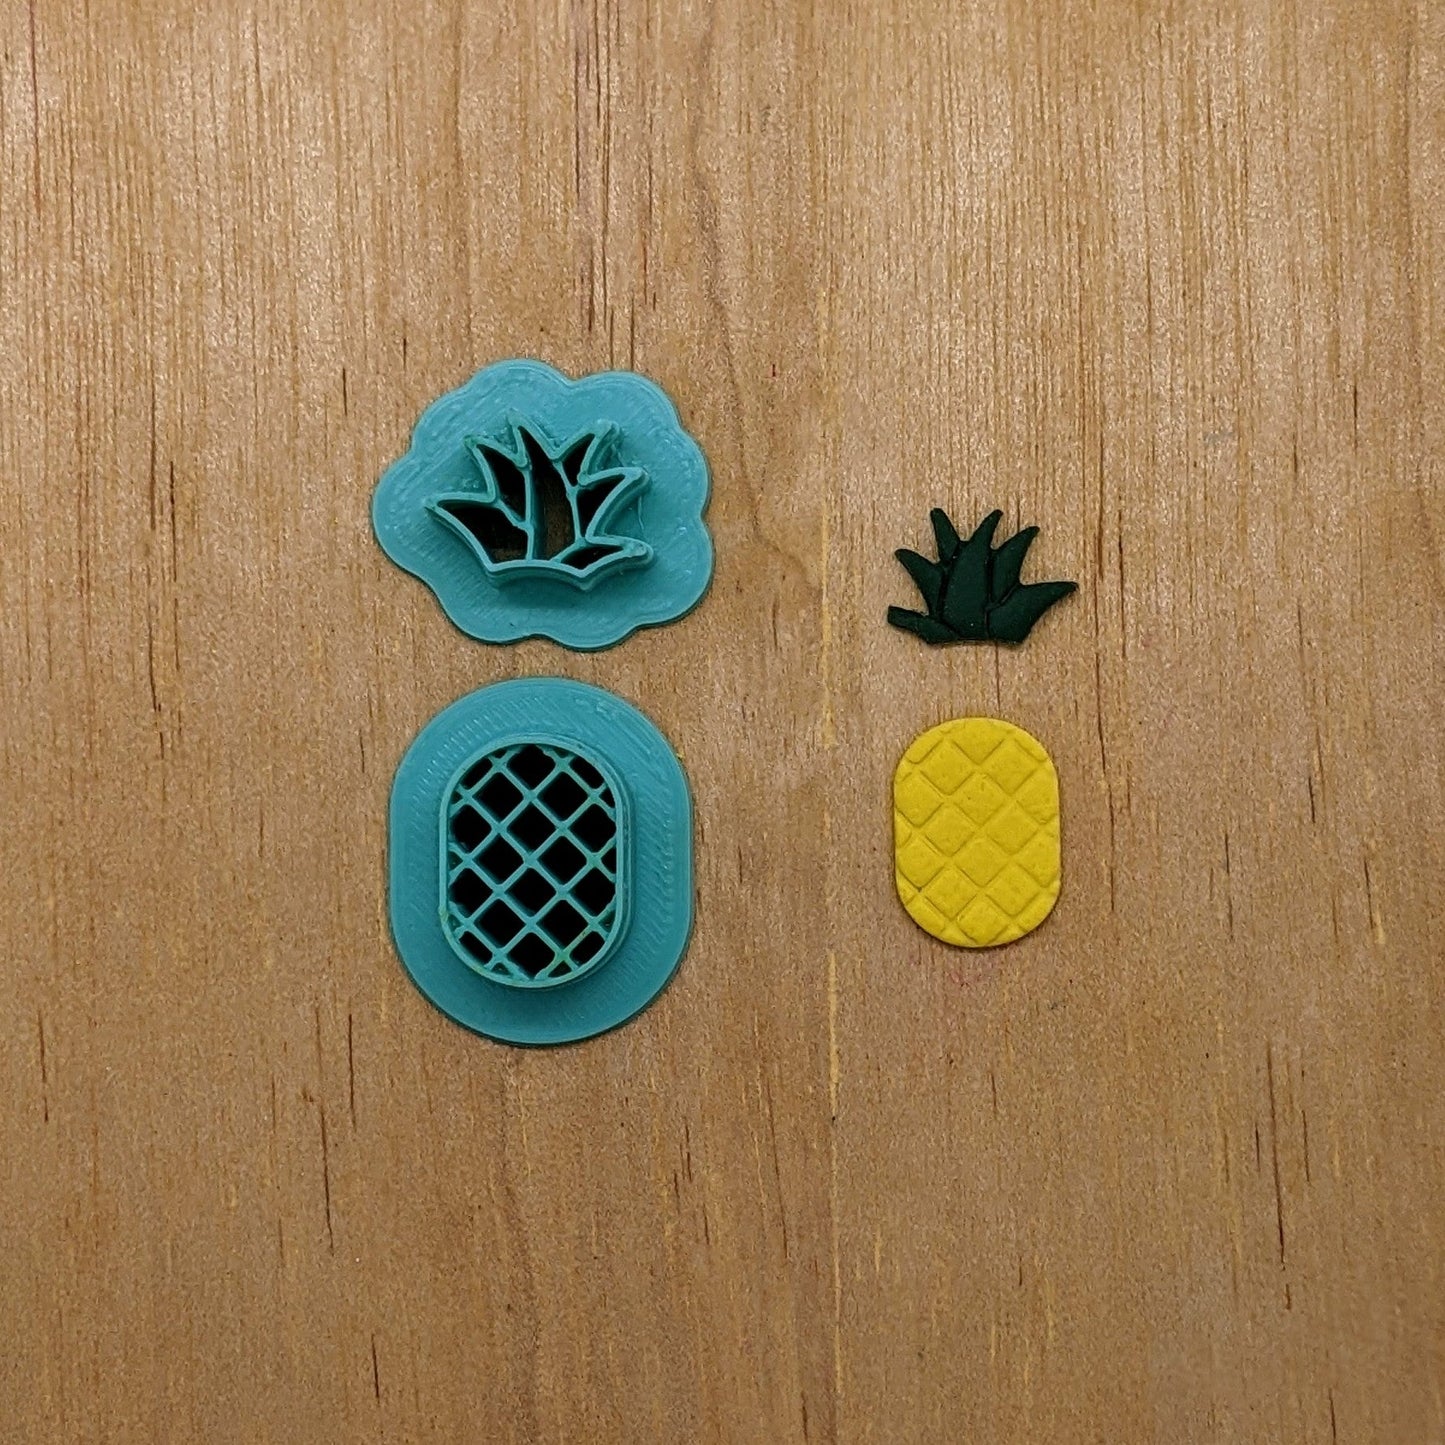 Pineapple and Leaves 2-Piece Cookie Cutter Set - Ideal for Ceramics, Pottery, Cookies, Polymer Clay, Fondant, and More